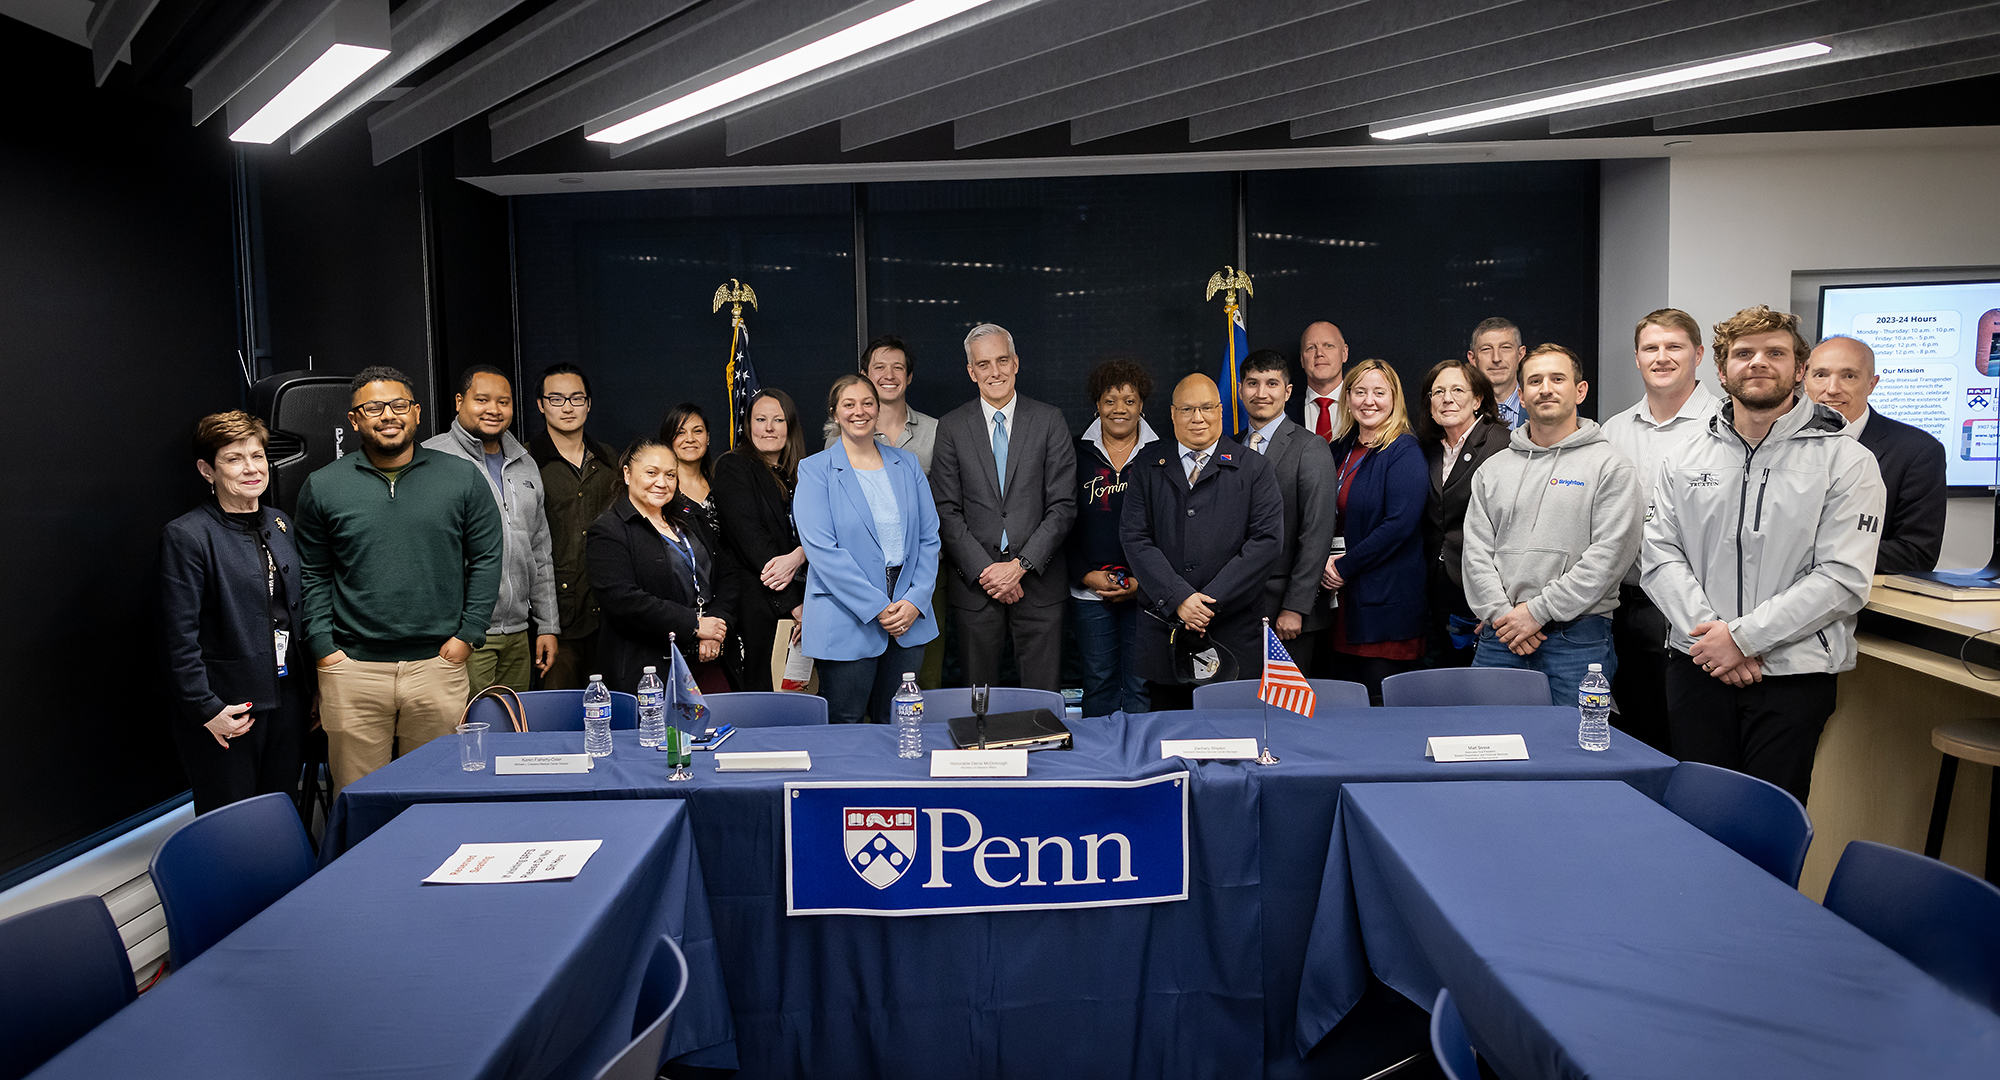 Secretary of Veterans Affairs smiles for a photo with students and staff from Penn, at table with Penn logo in front